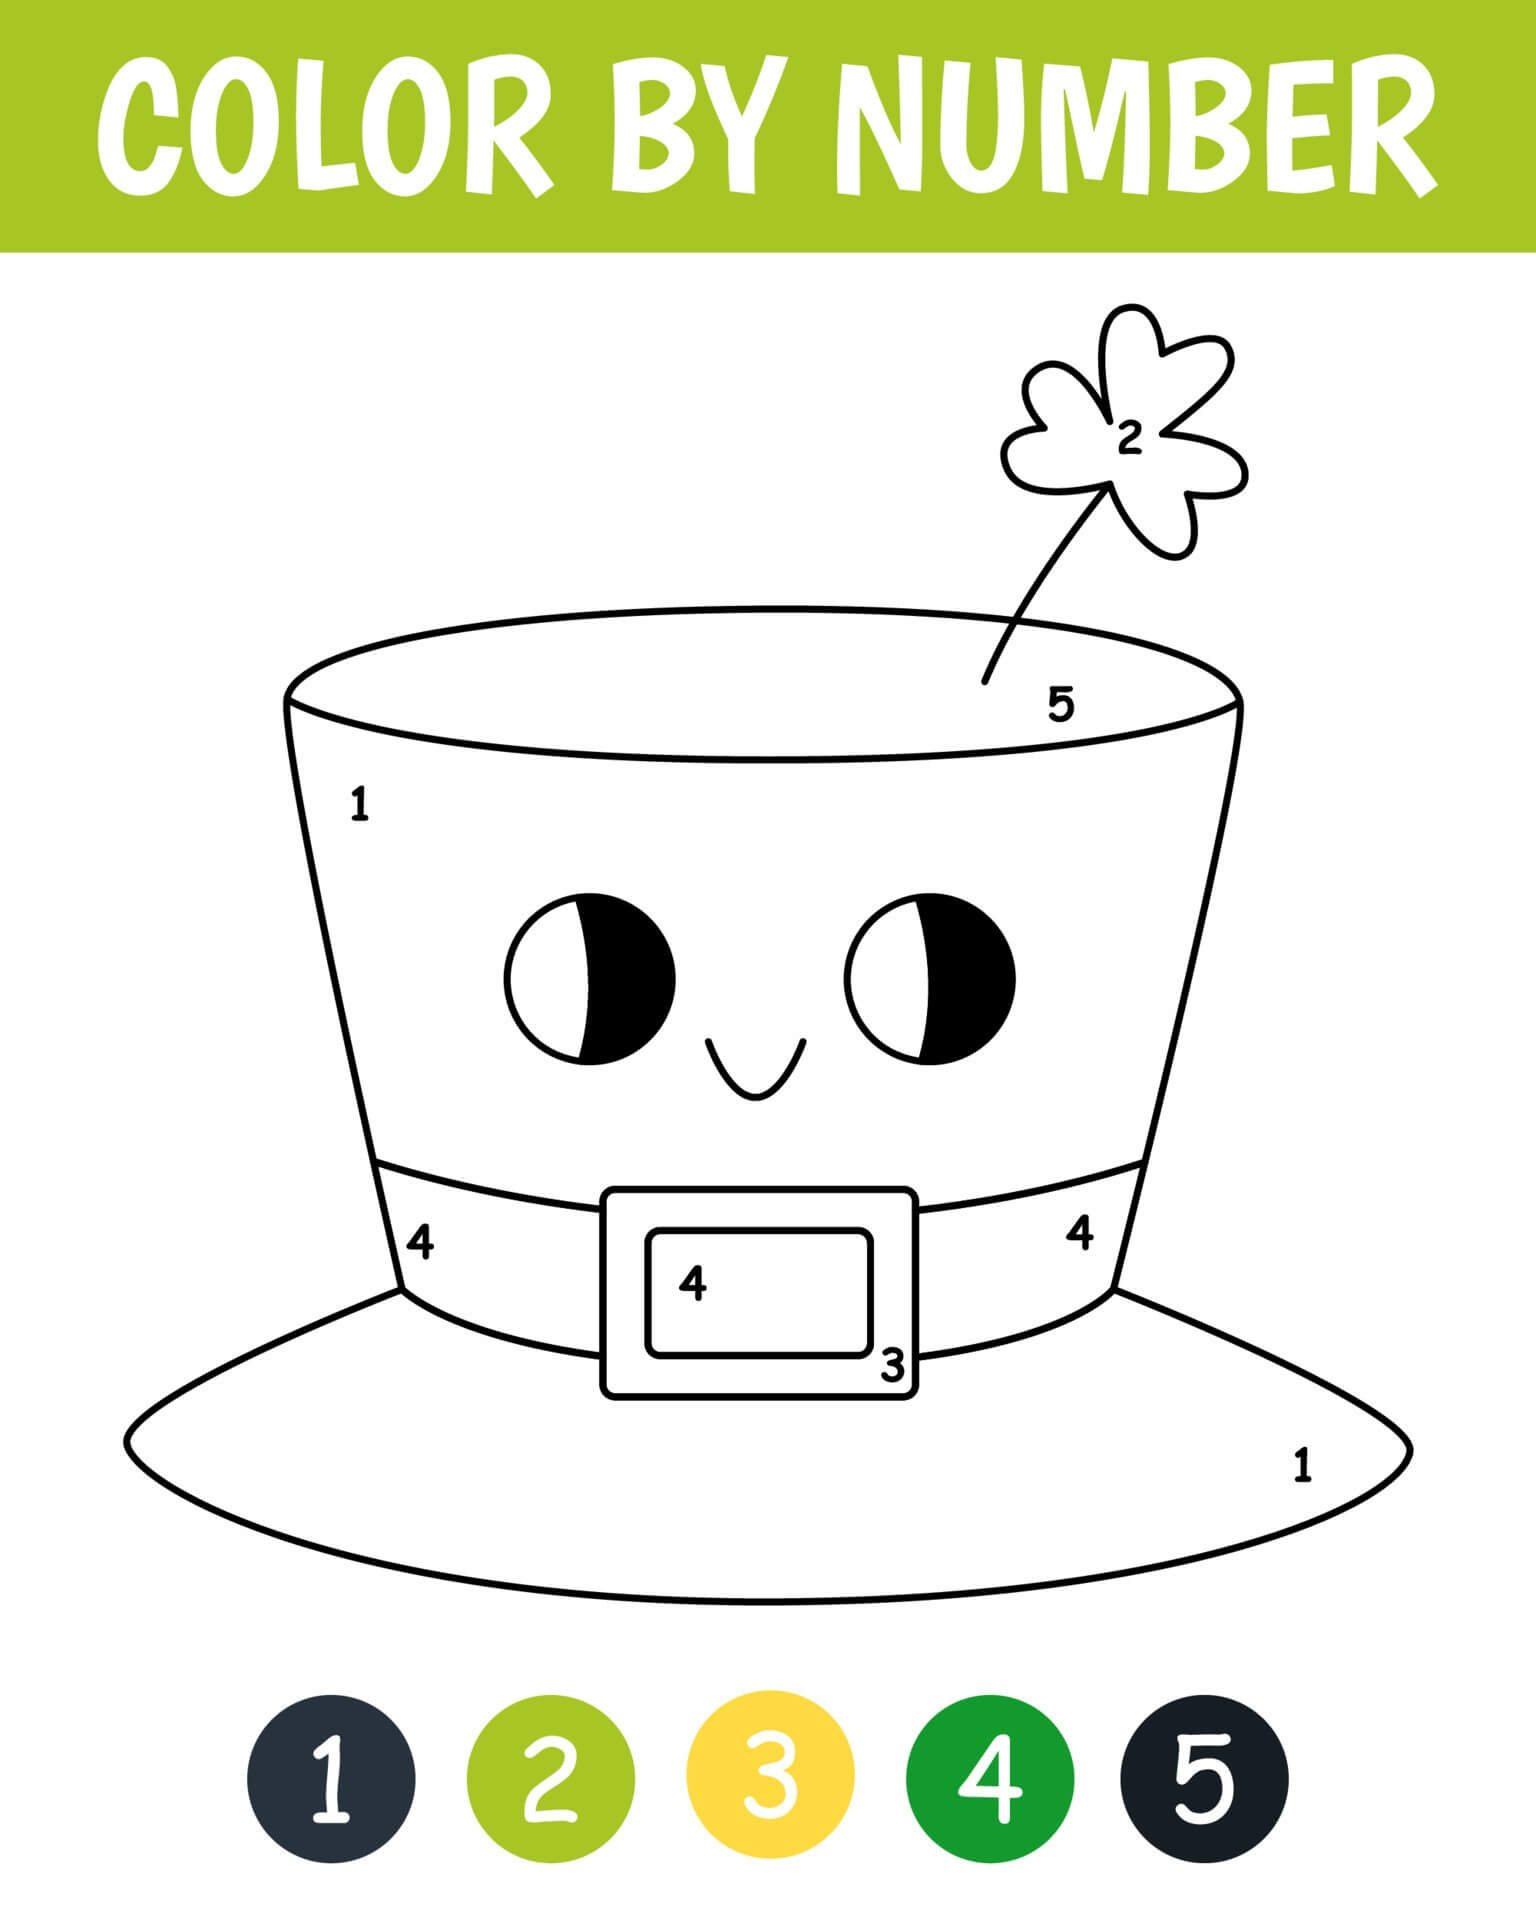 Cute Hat With Clover. St. Patrick’s Day Color By Numer Color By Number